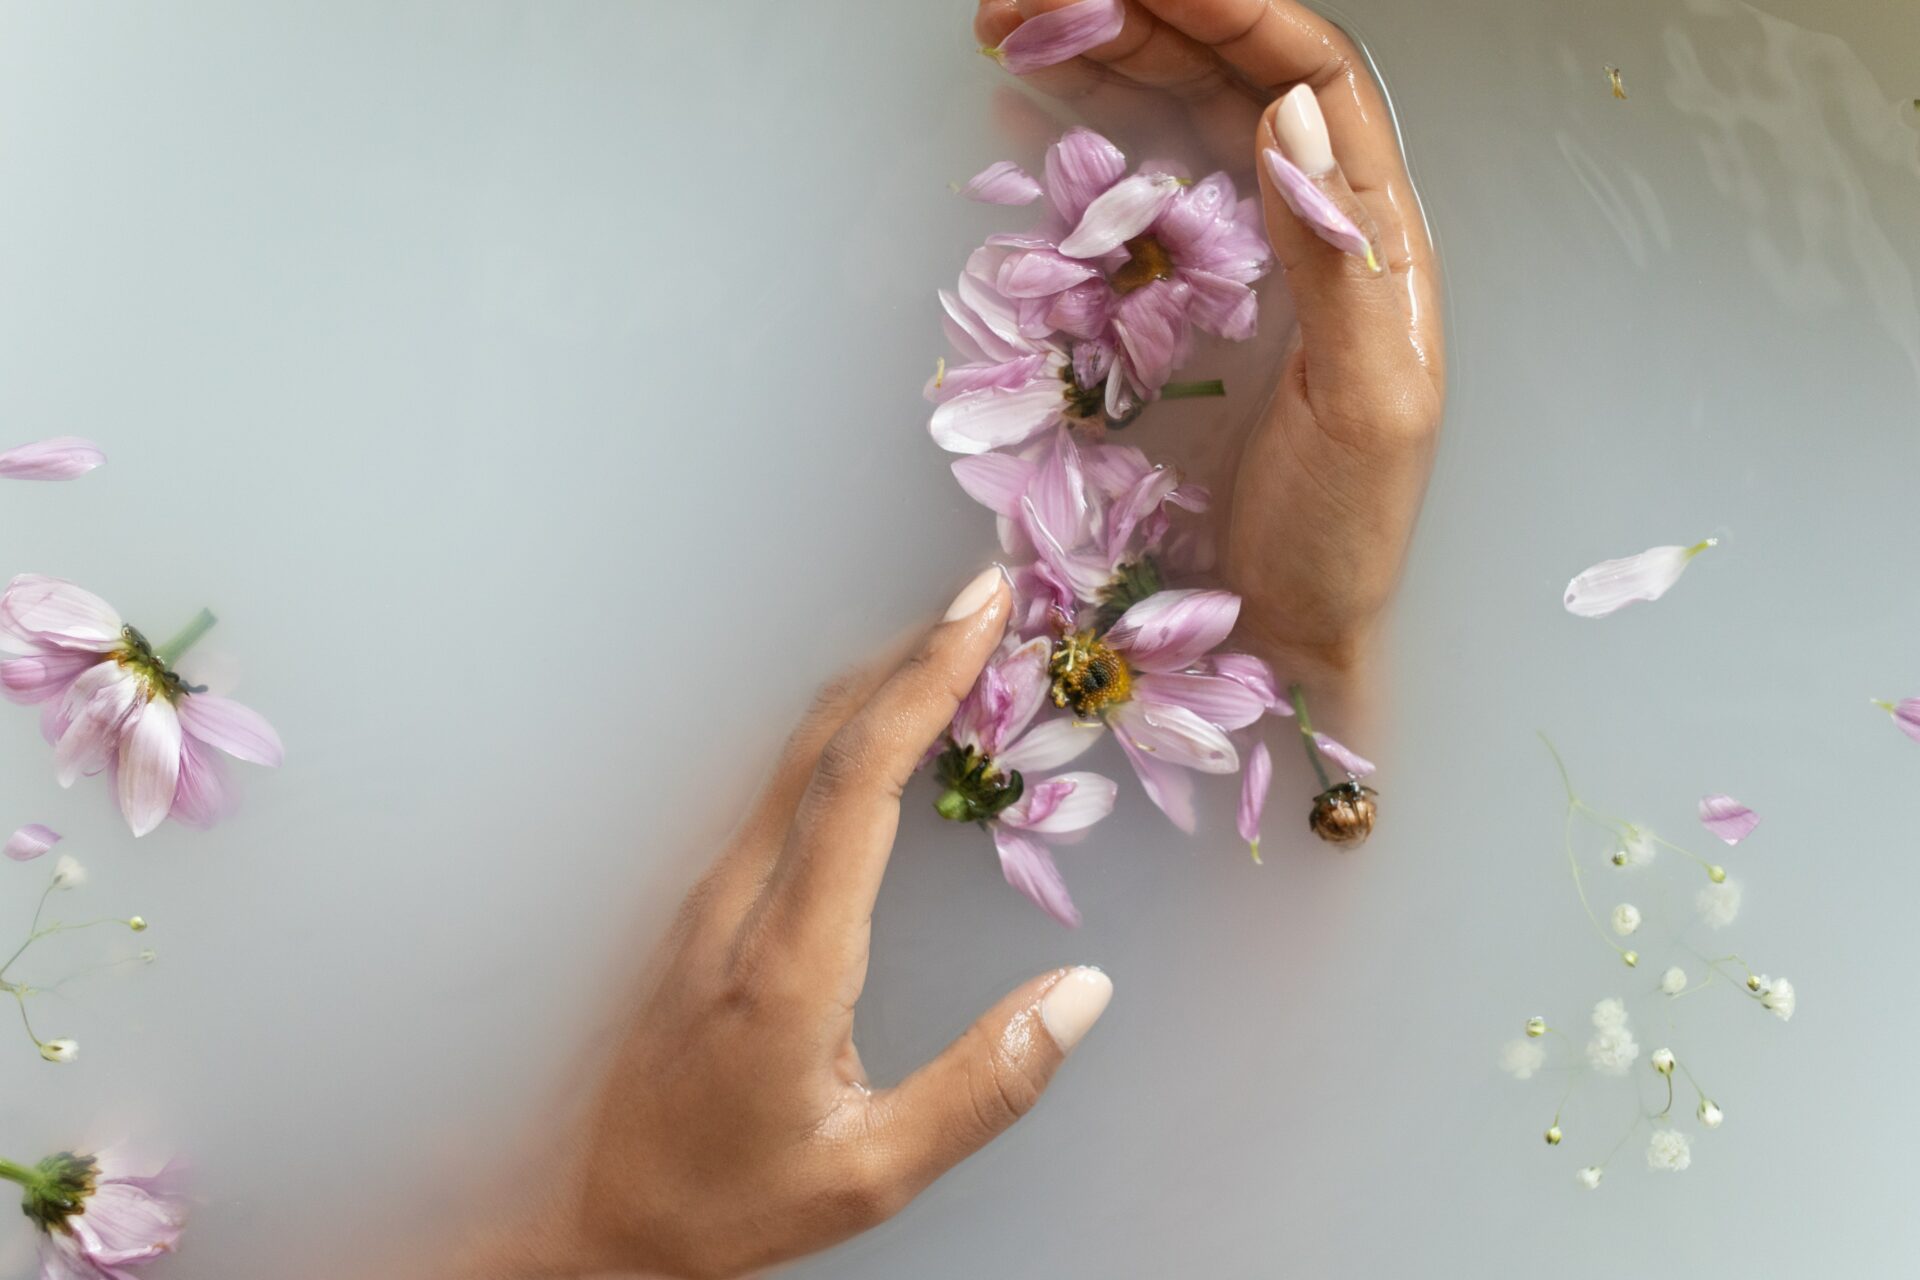 Hands in bath with flower petals - Young Living Lavender Life blog 